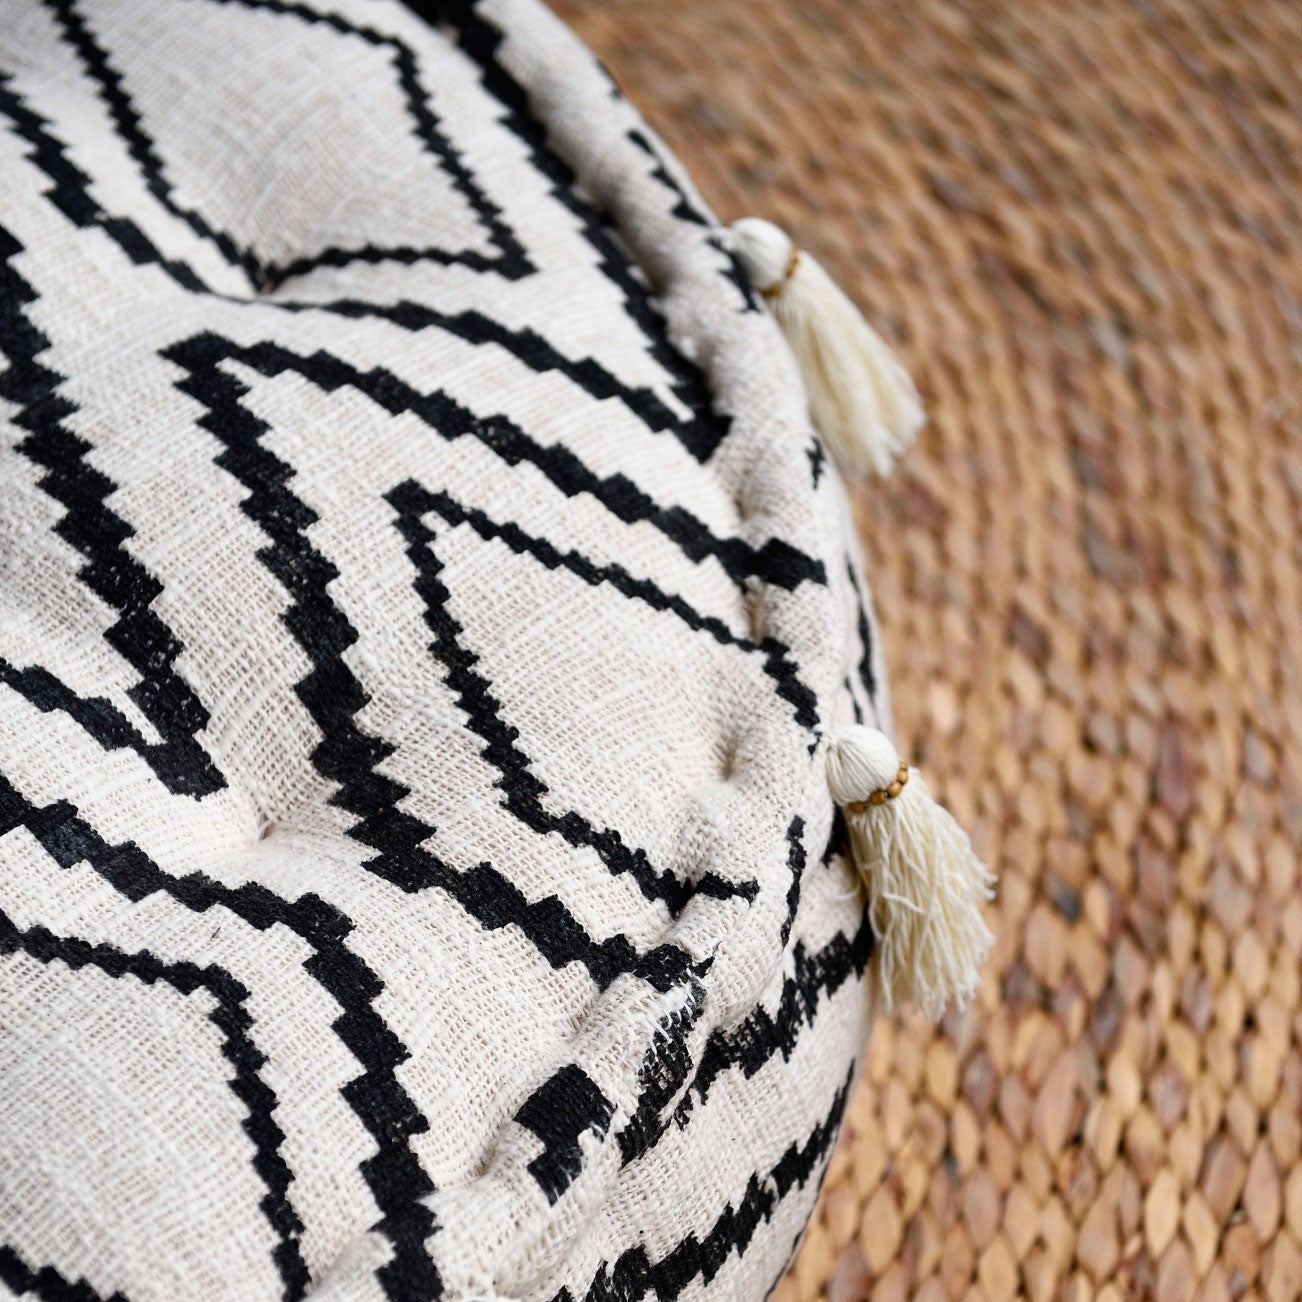 Round Raw Cotton Pouf with Tassels - Natural